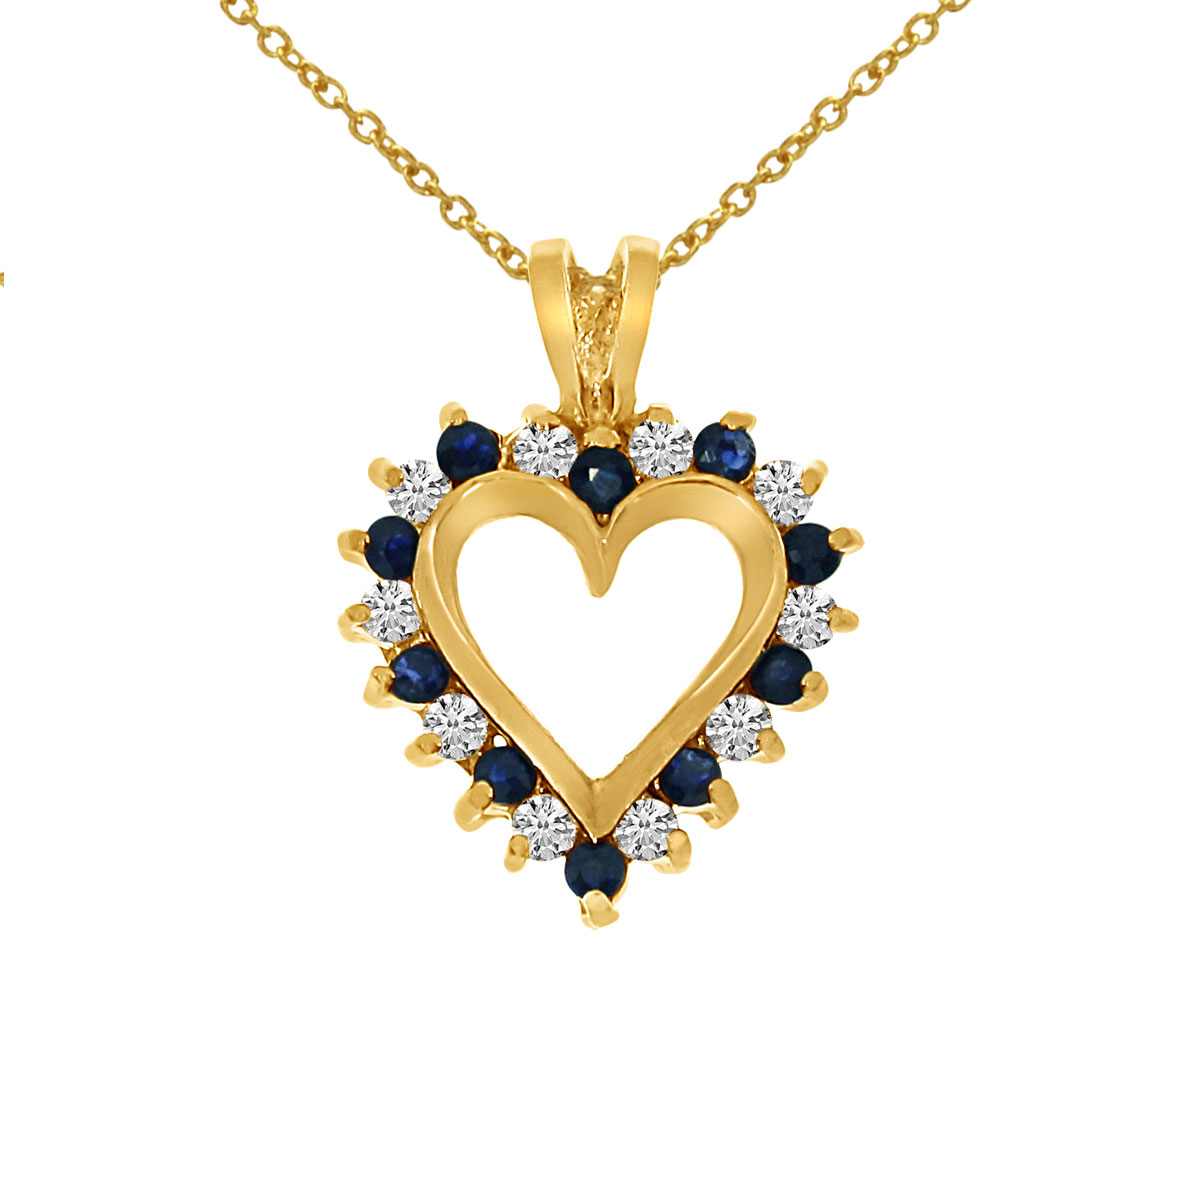 JCX3029: A dazzling 14k yellow gold heart pendant surrounded by .25 carats of shimmering diamonds and .25 carats of beautiful sapphires.